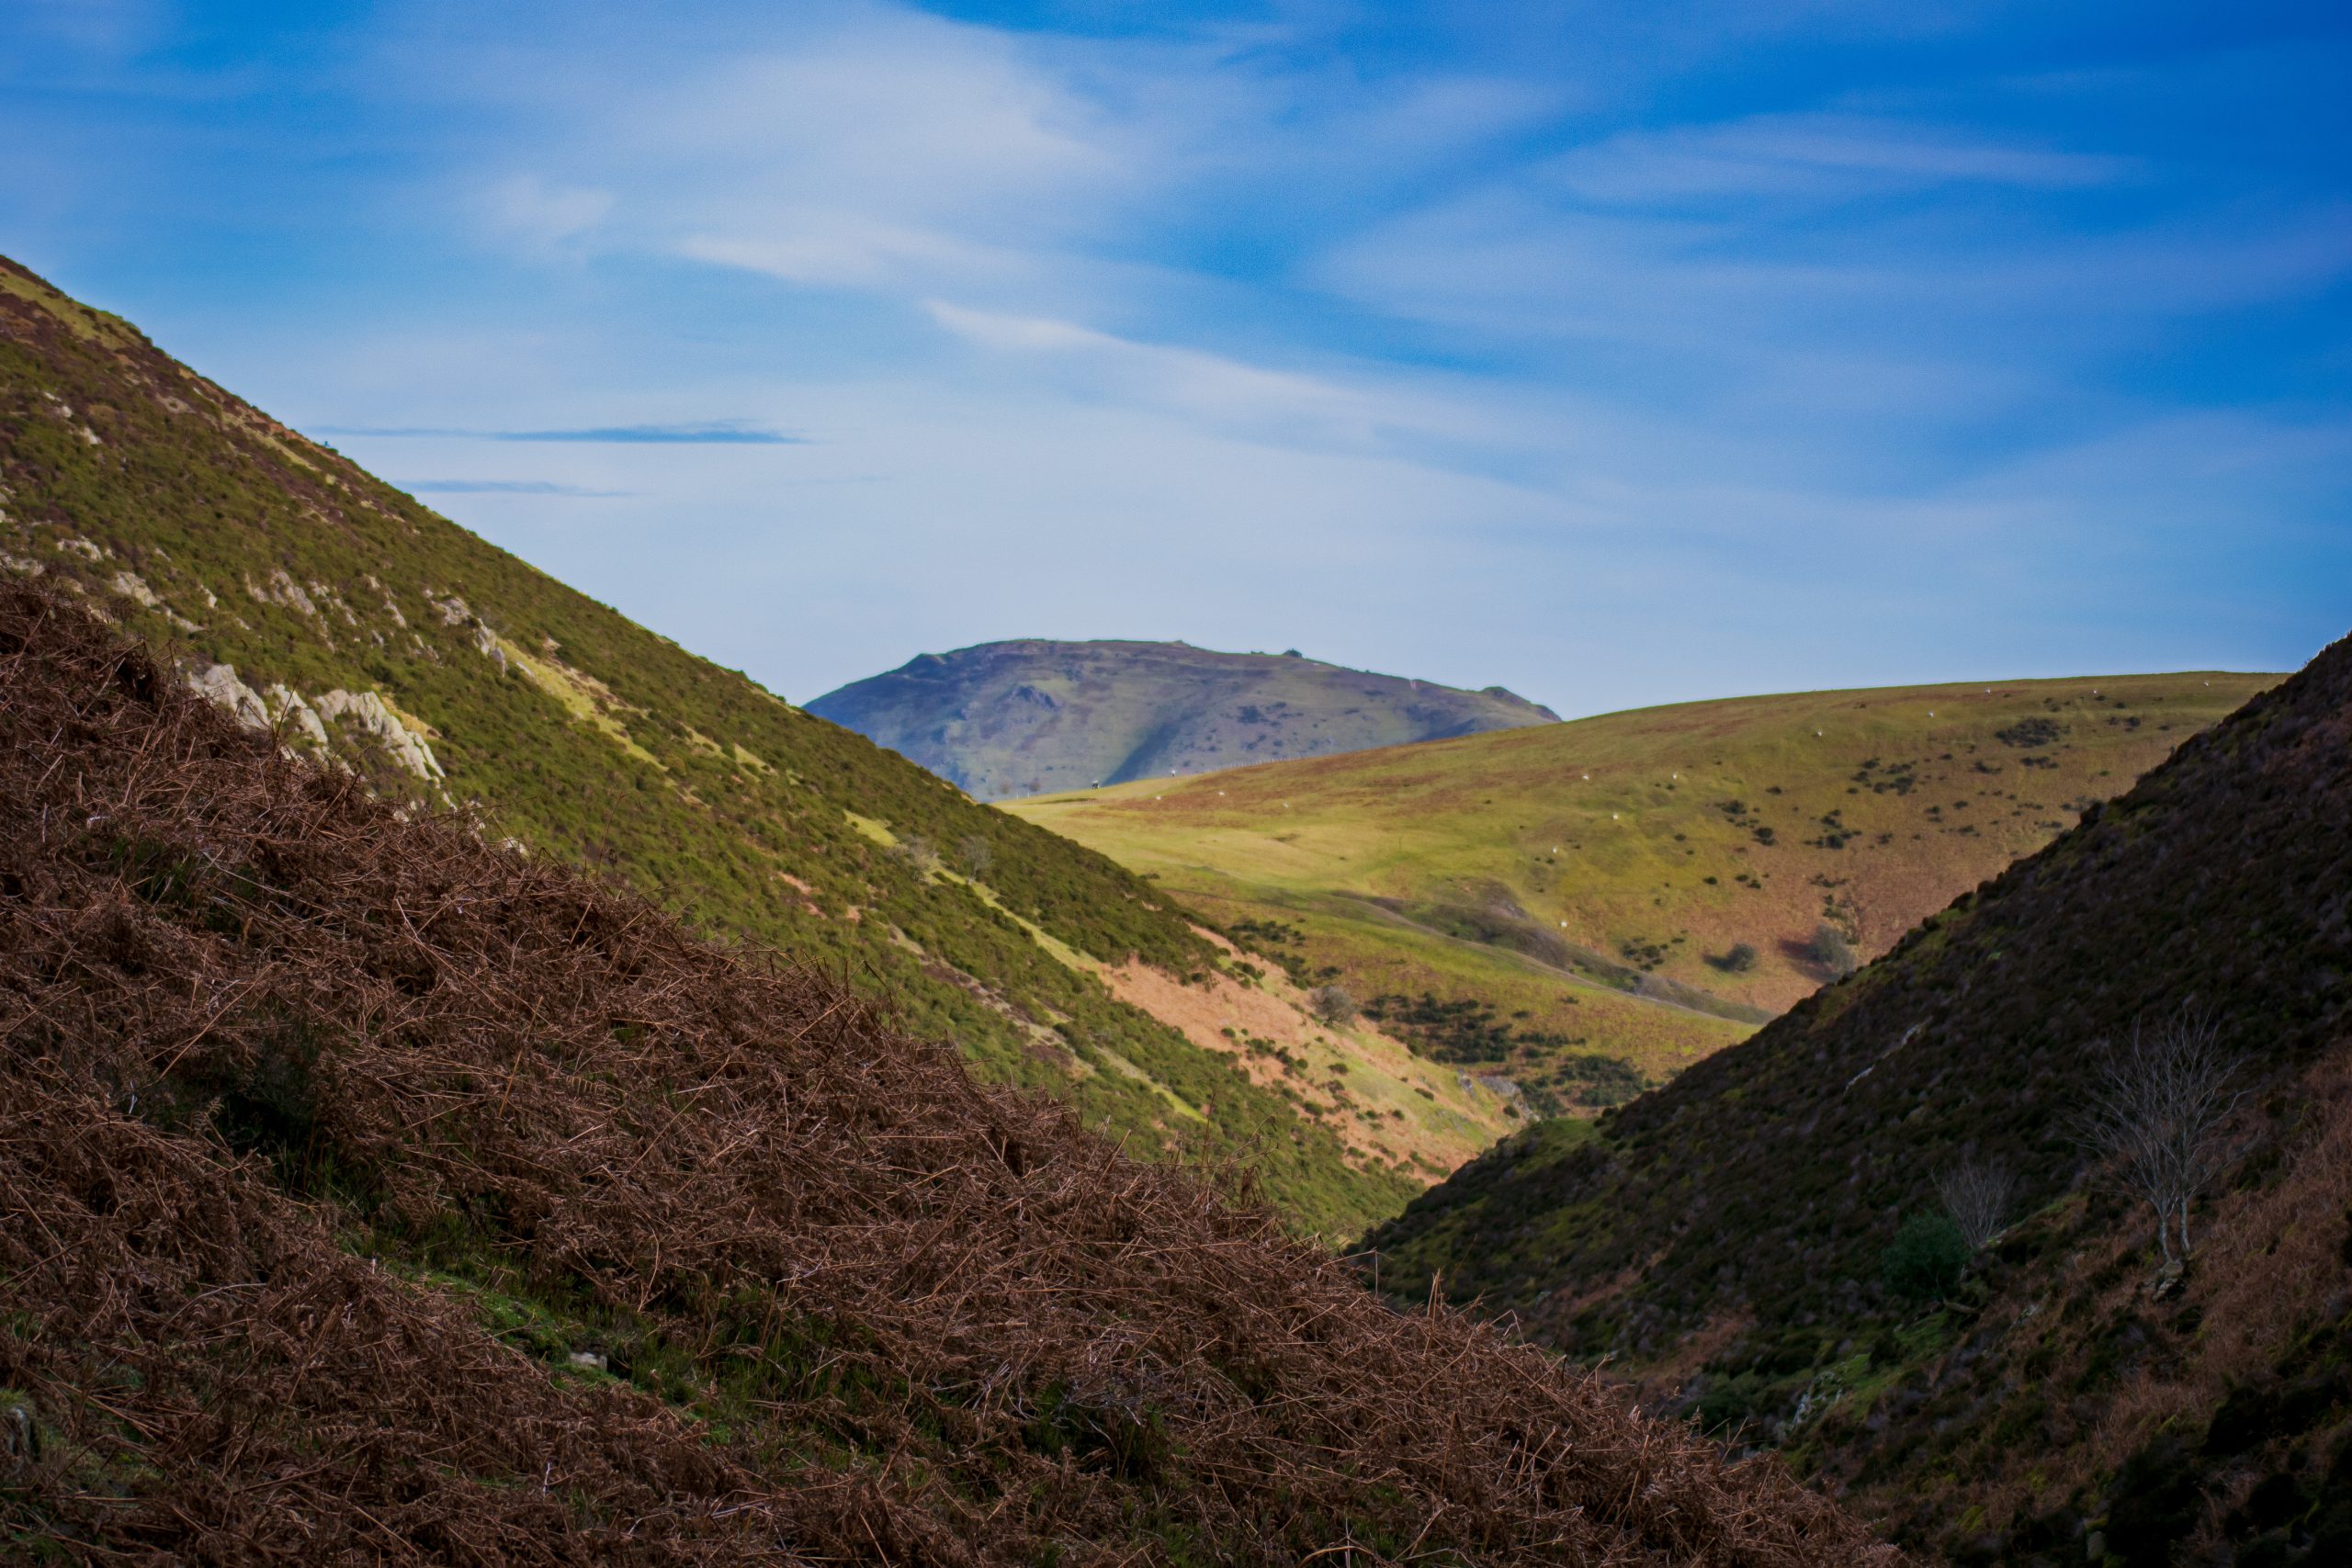 Photographing Carding Mill Valley on an Overcast Day